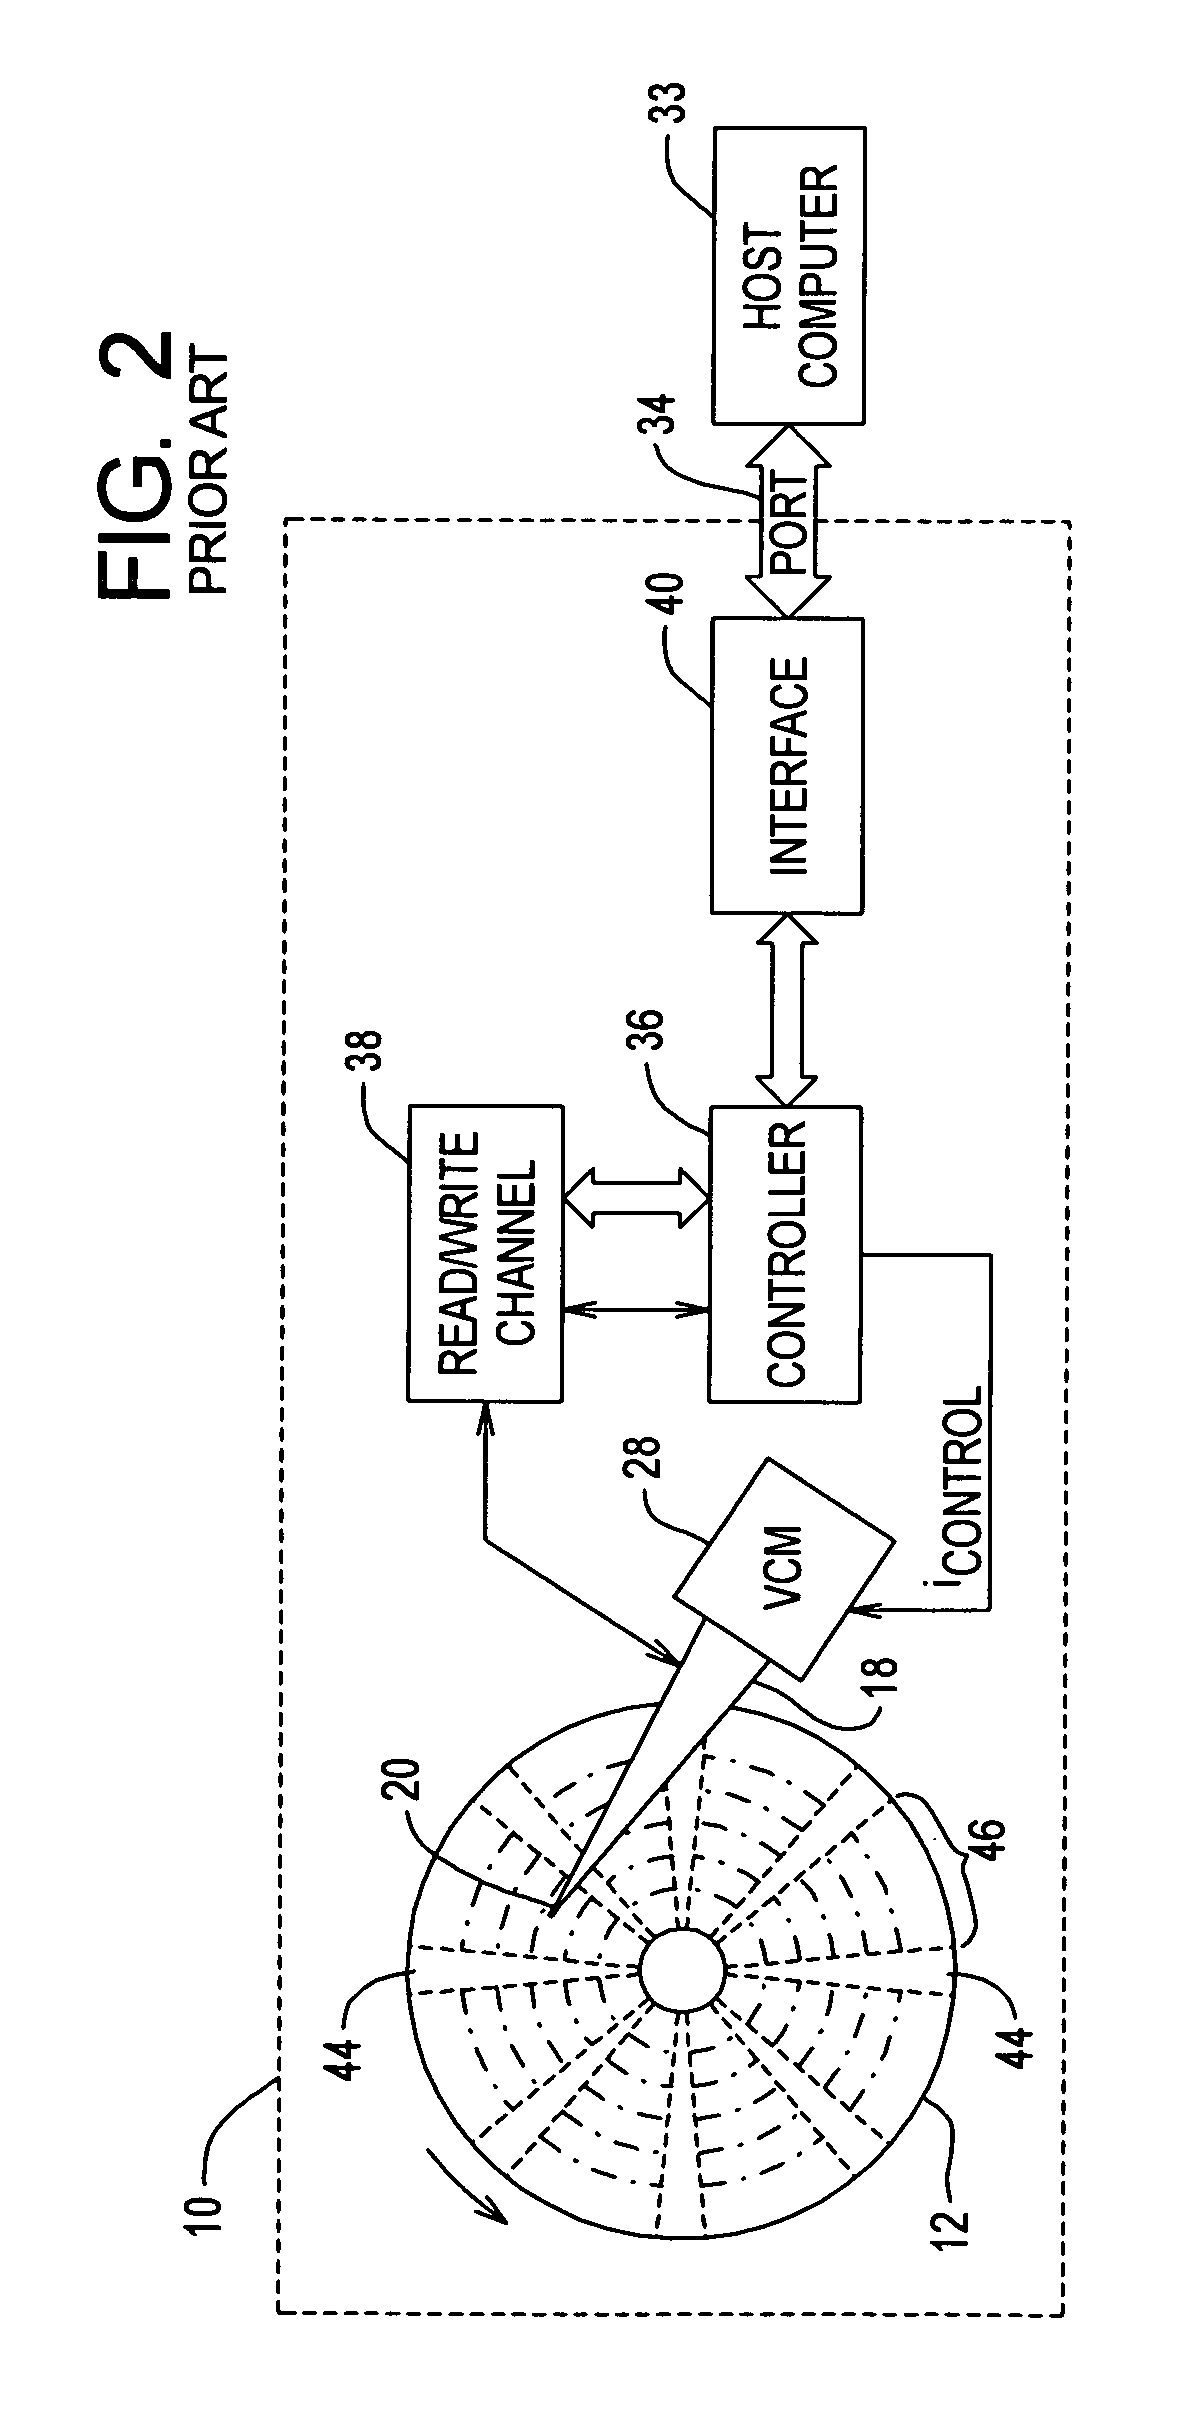 Method and apparatus for performing seek operations in a disk drive having a disk surface with spiral servo information written thereon